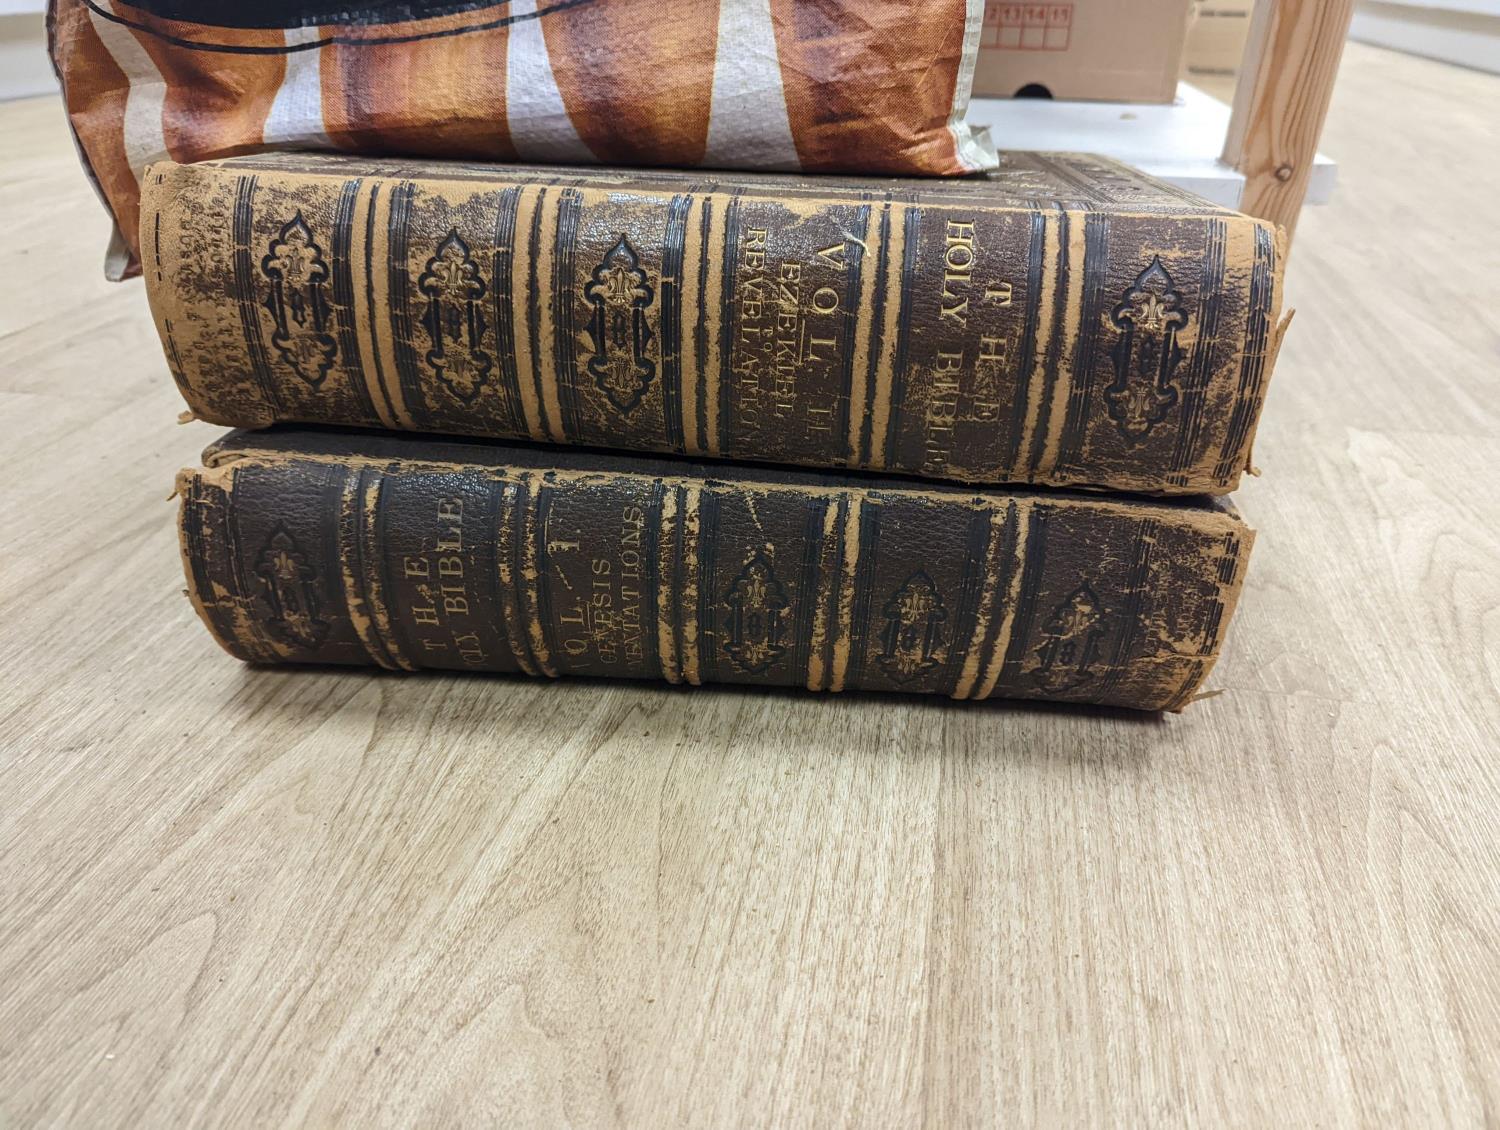 A group of leather bound books and 2 bibles. - Image 3 of 3